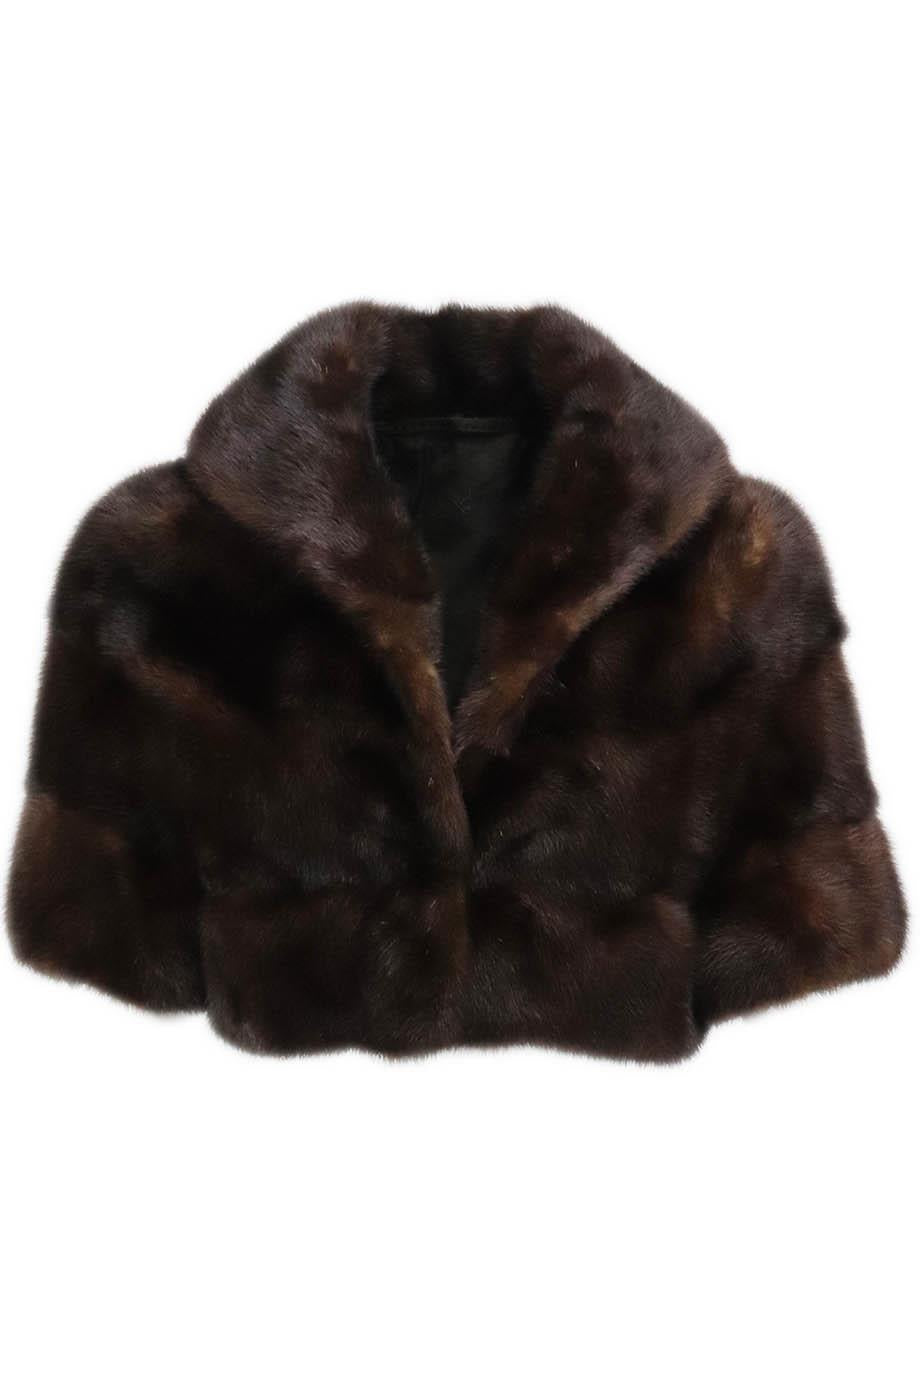 UNKNOWN BRAND CROPPED MINK FUR JACKET SMALL